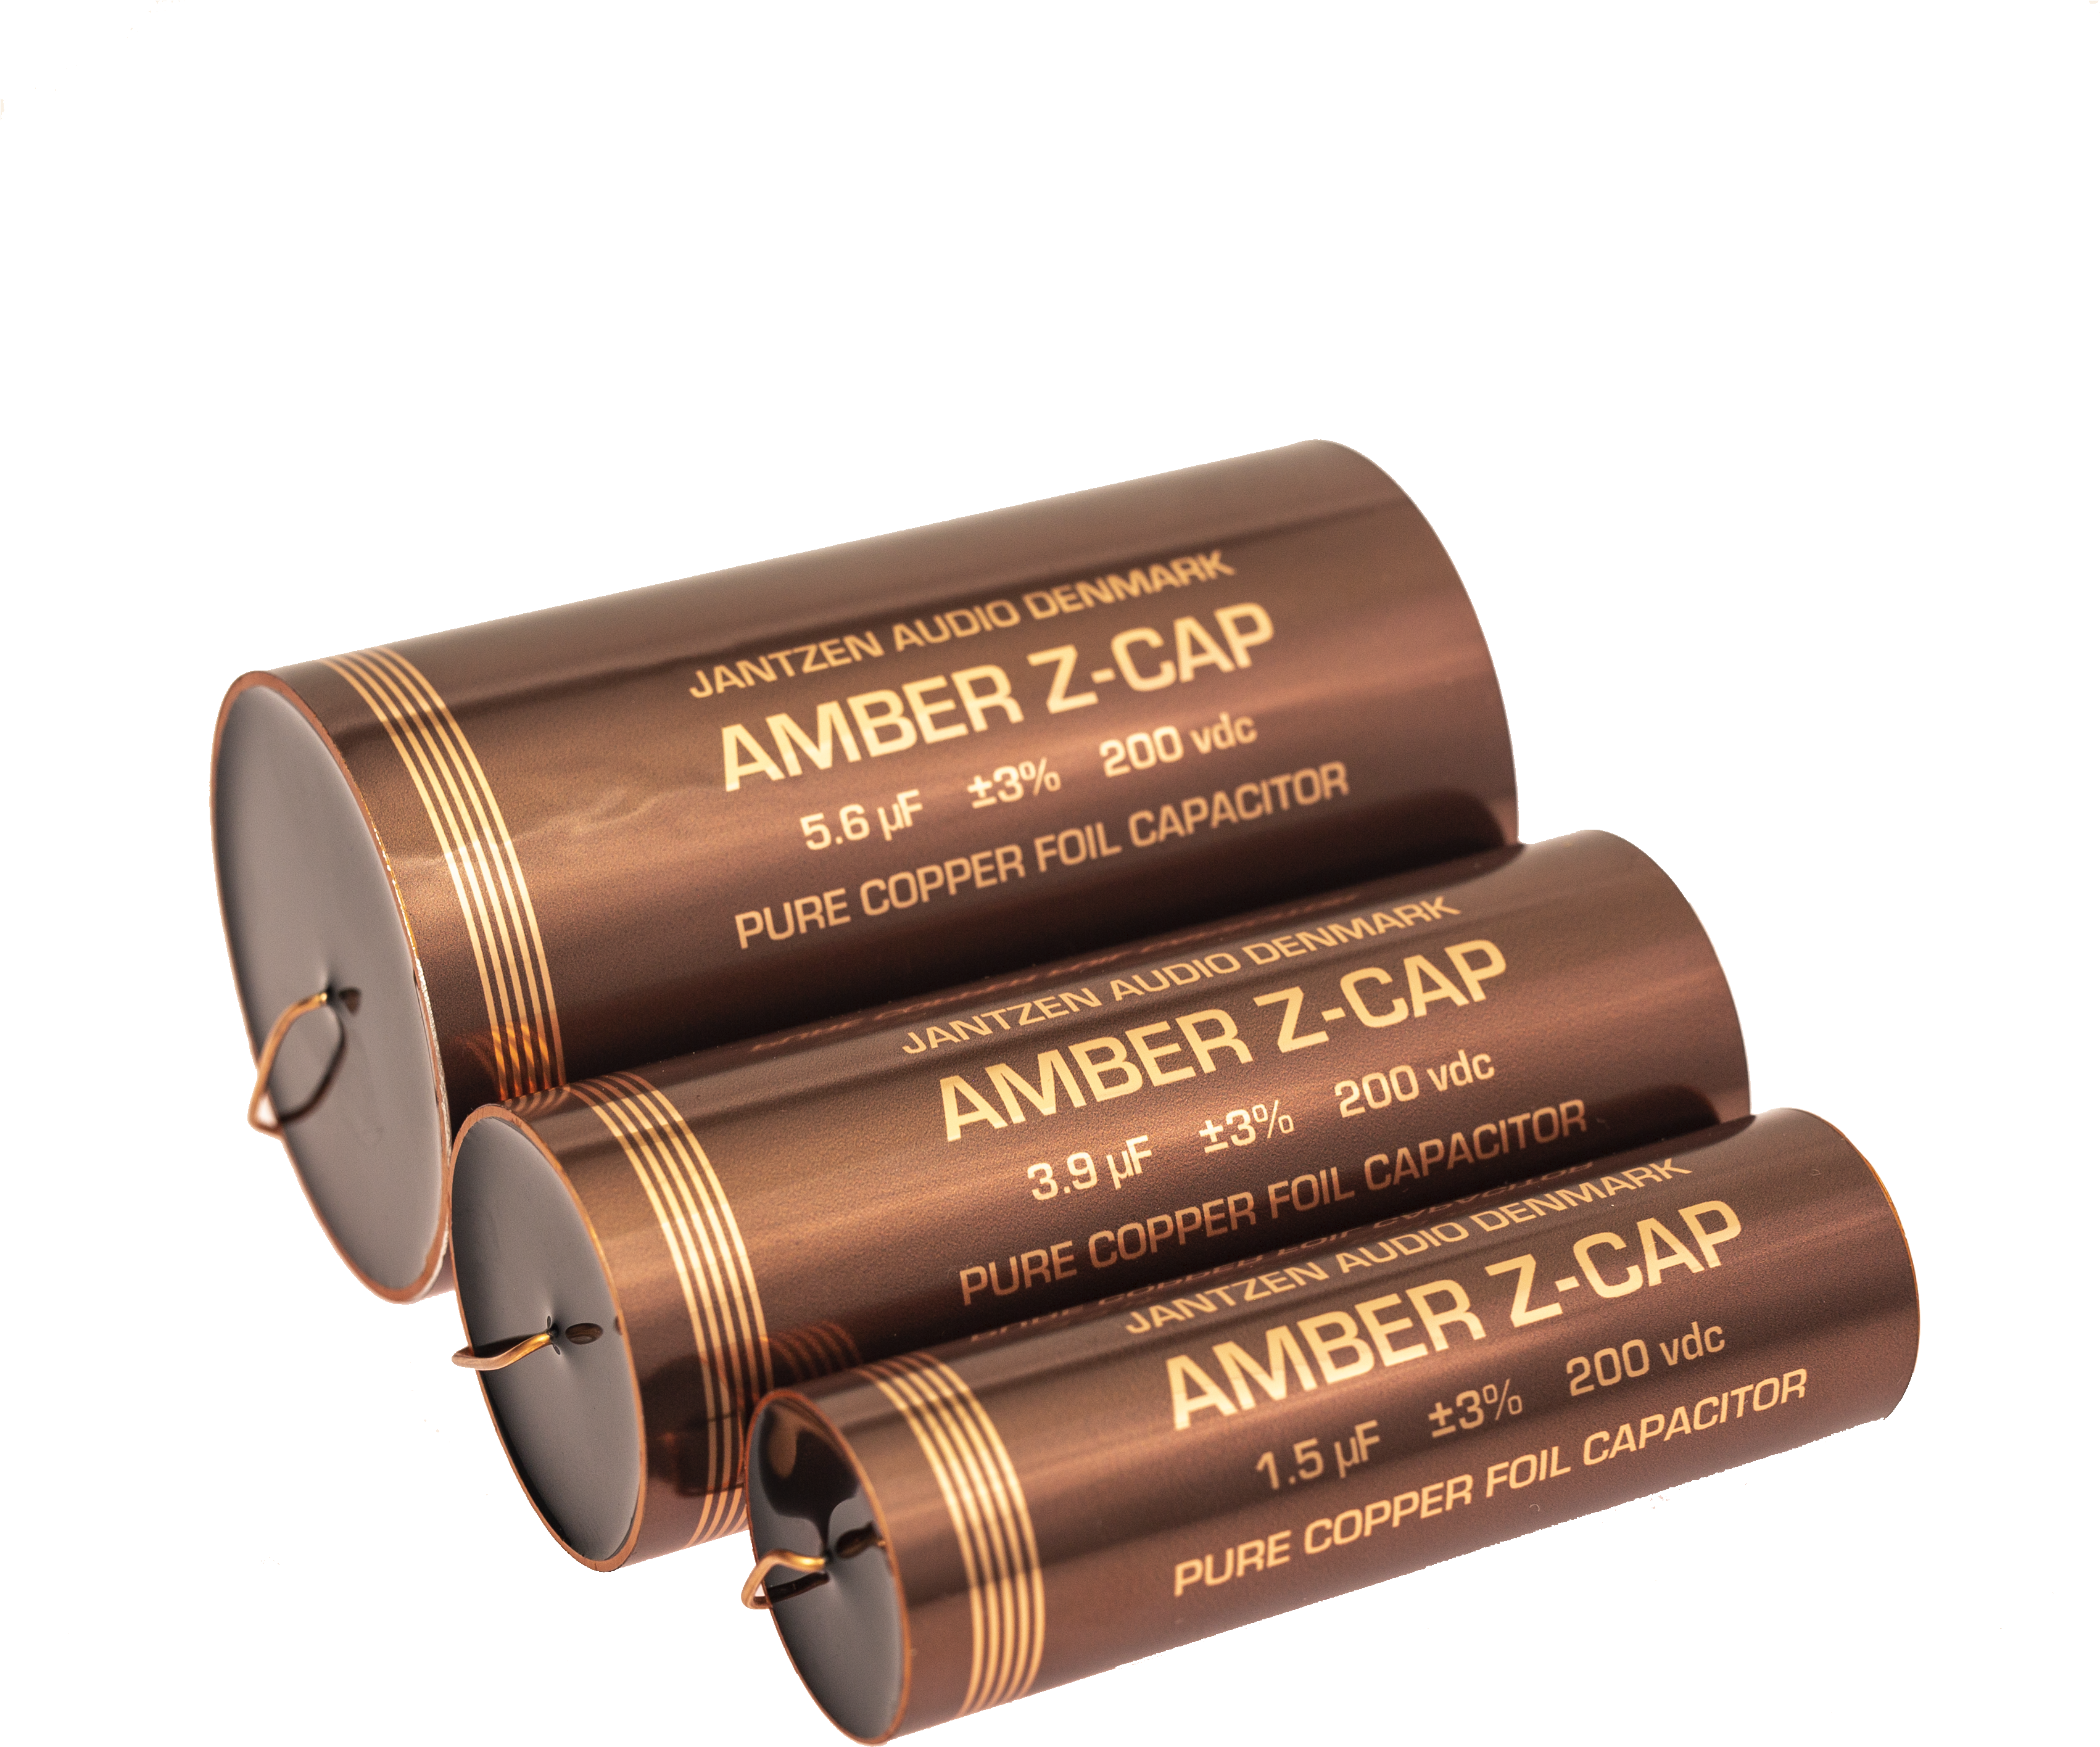 A Group Of Copper Capacitors